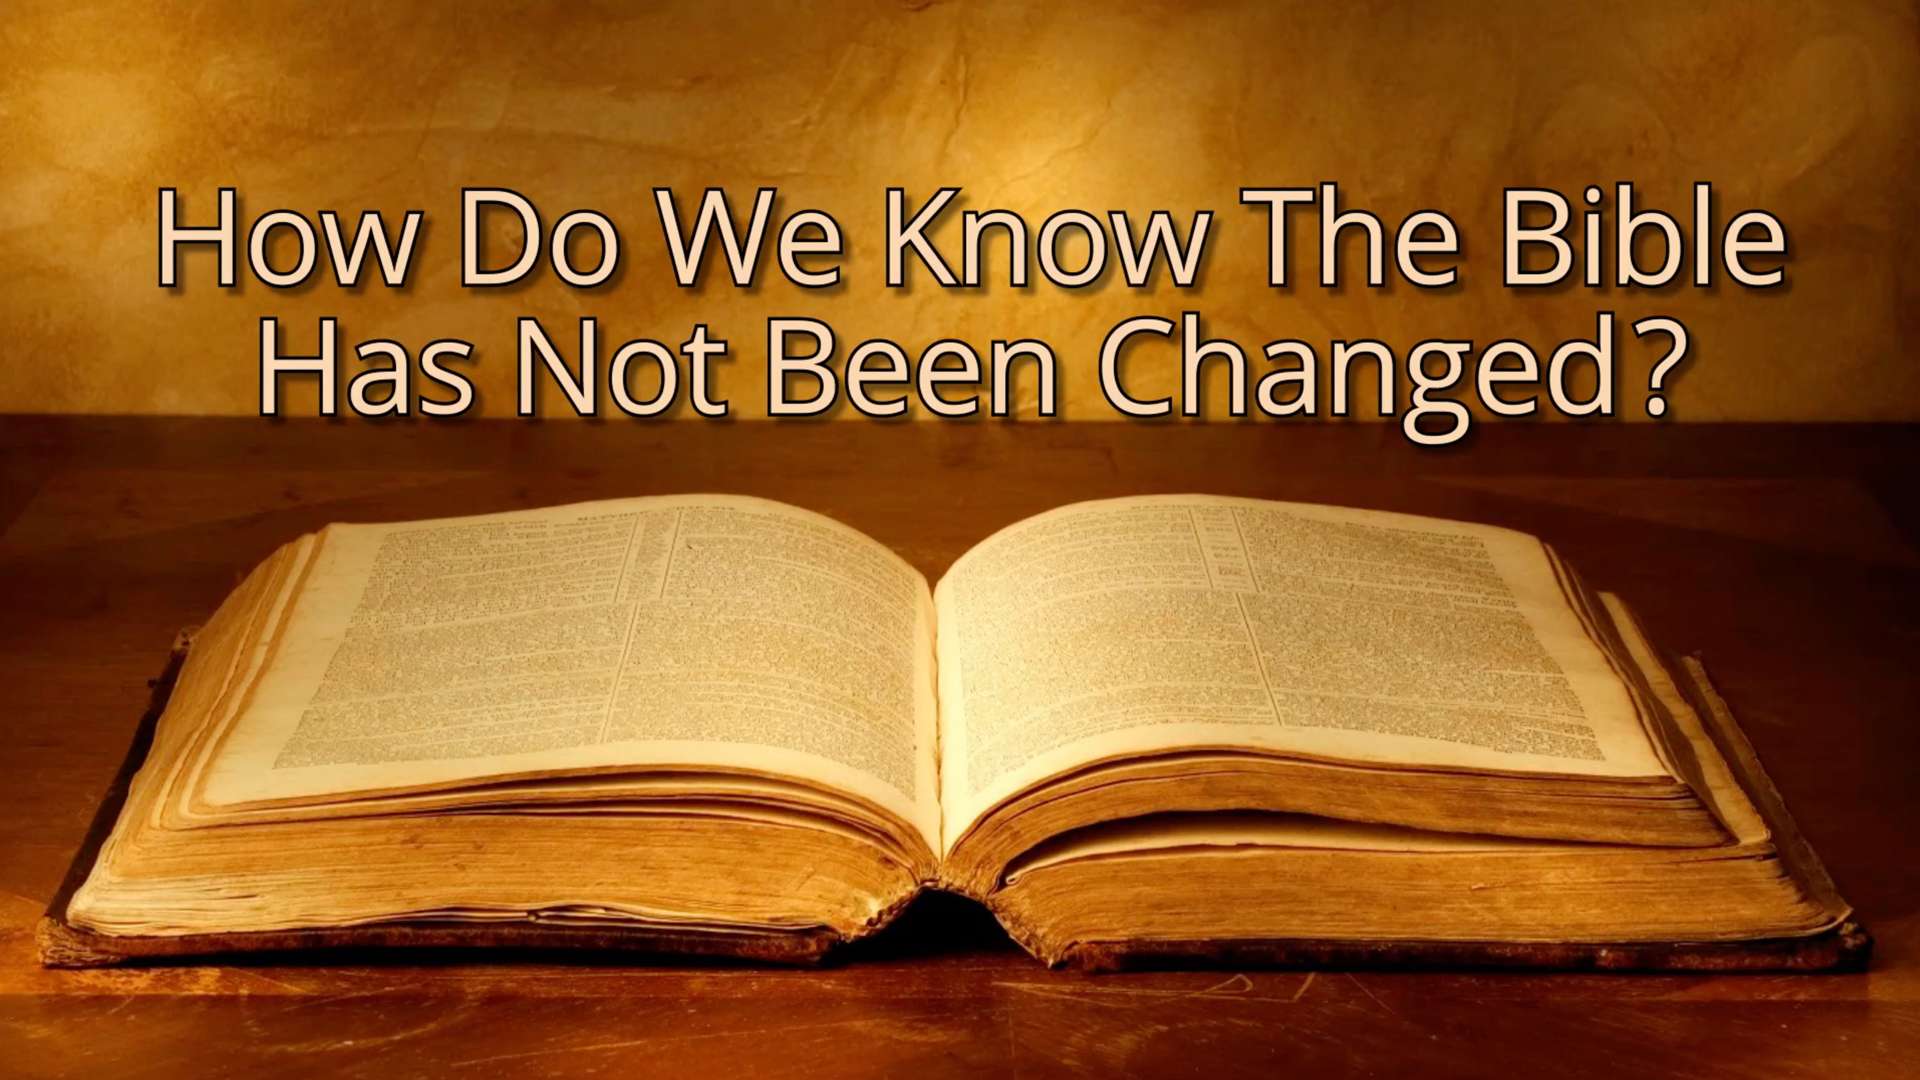 How Do We Know The Bible Has Not Been Changed?